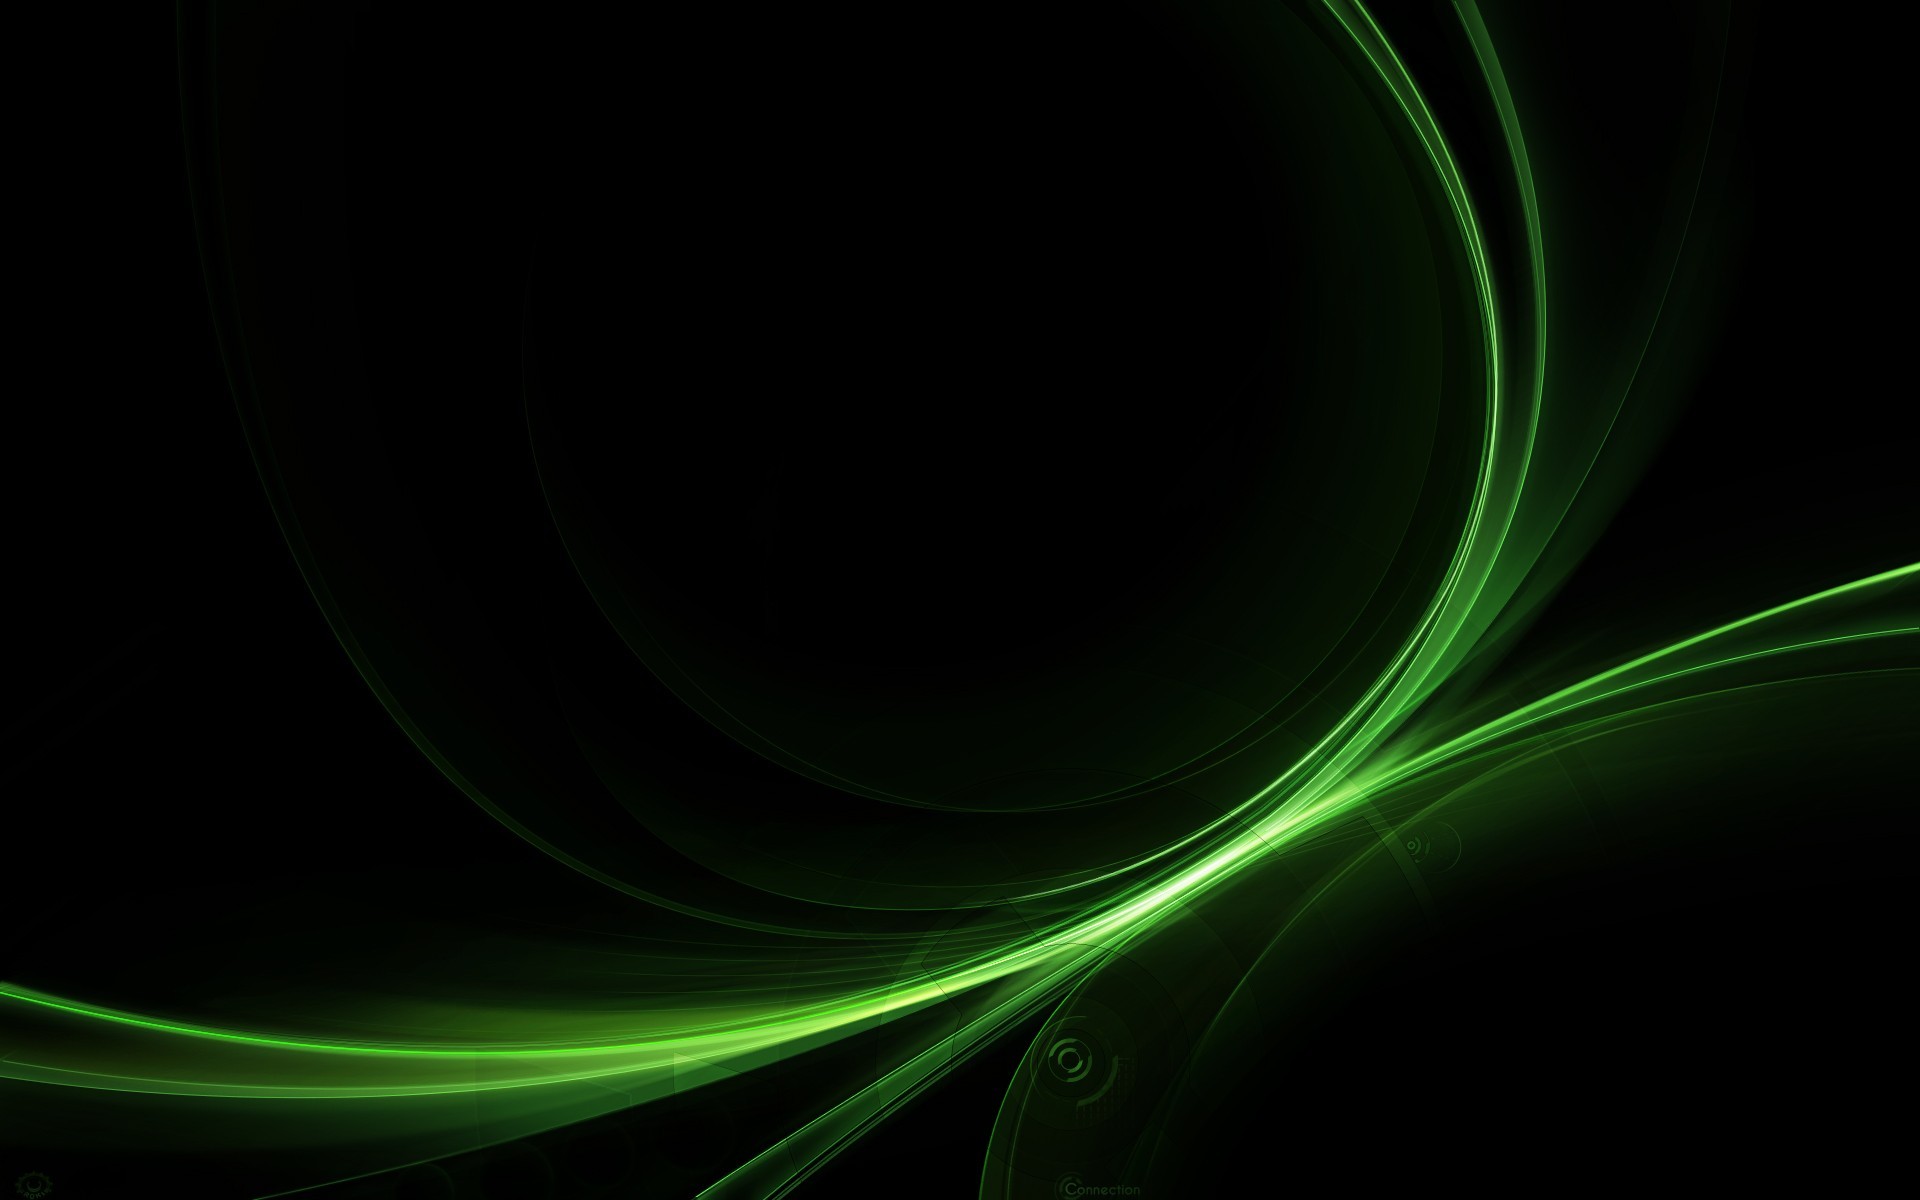 1920x1200 ... Black abstract wallpaper with green lines | HD Abstract Wallpapers ...